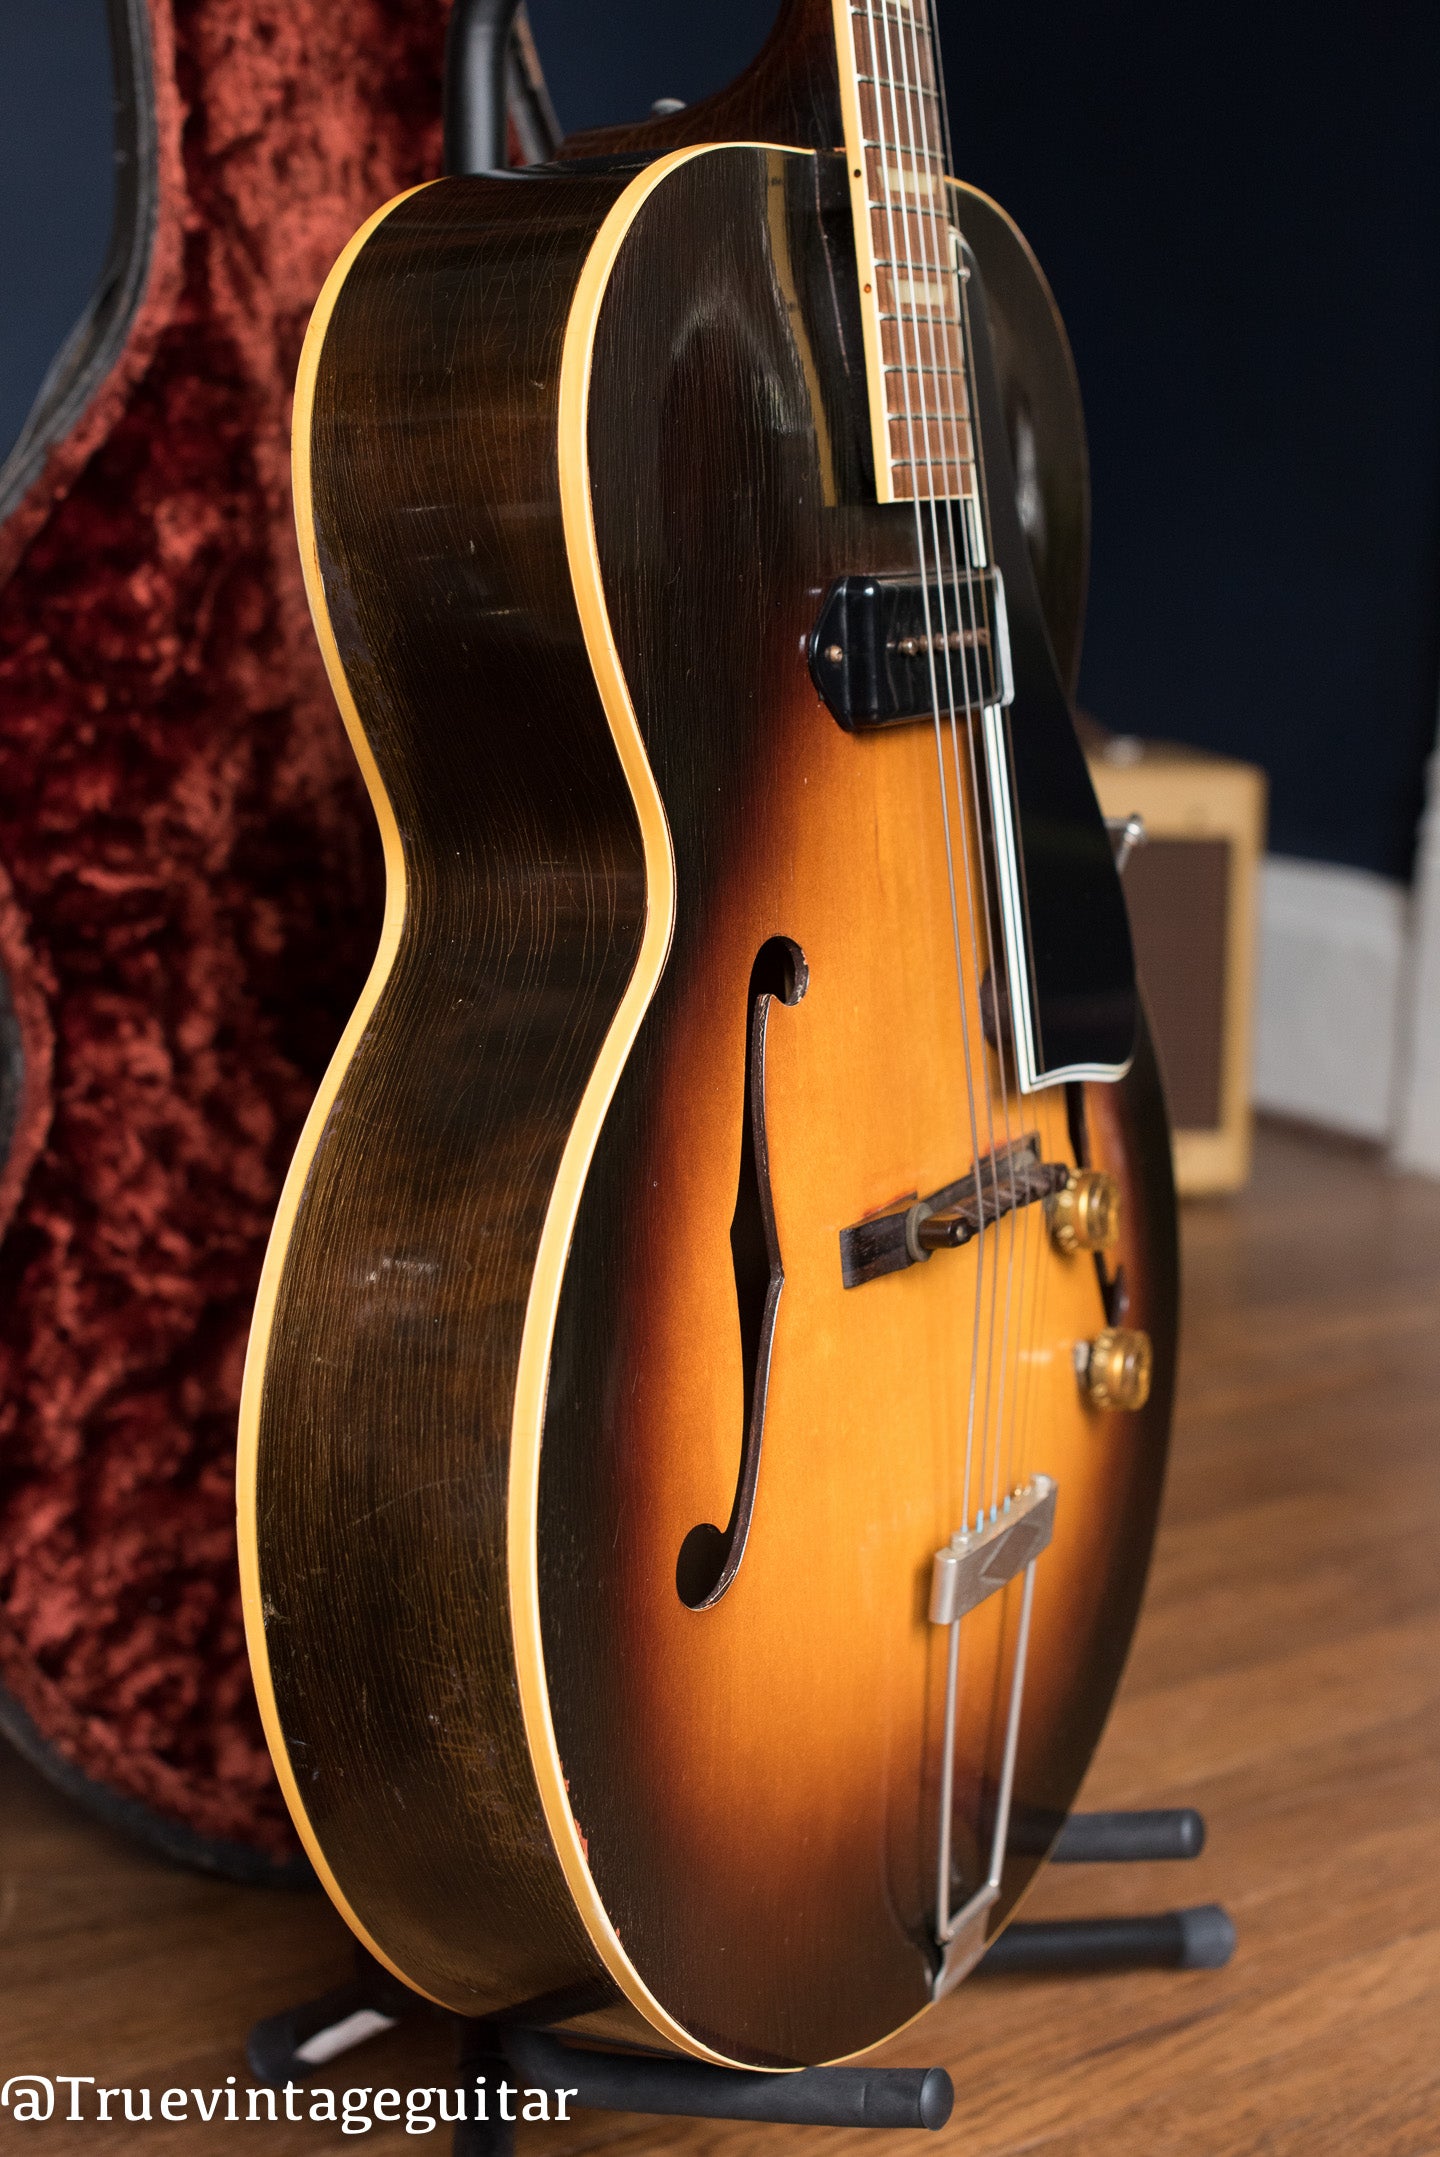 Gibson archtop electric guitar 1950s